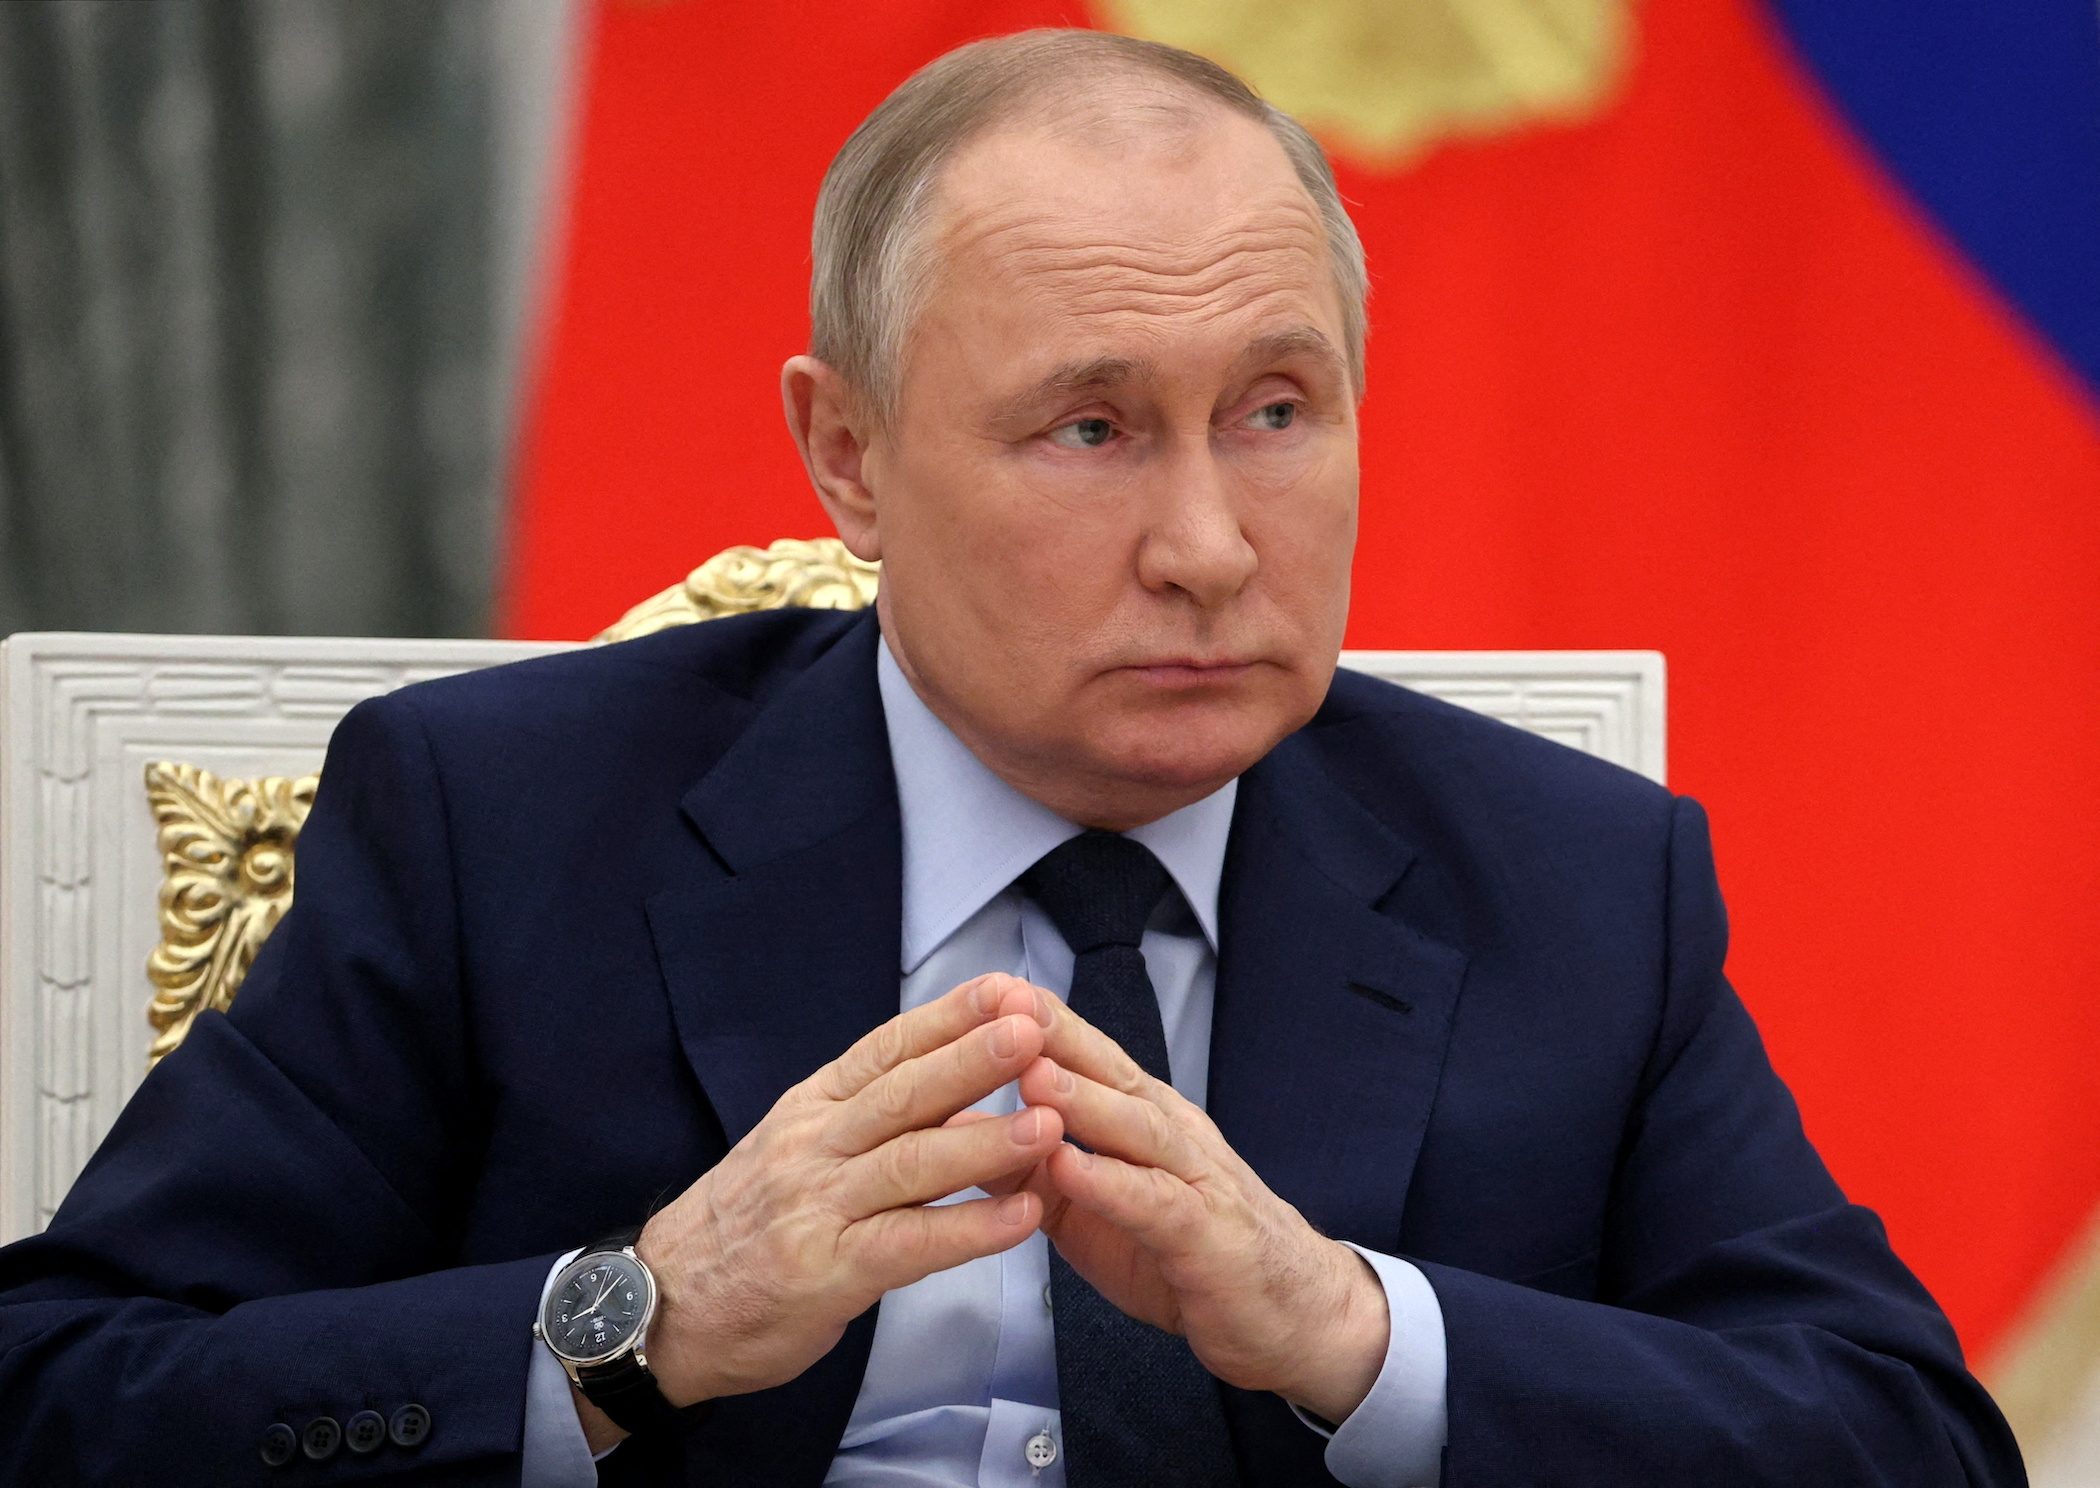 Putin wants Russia to boost its use of metals to counter sanctions